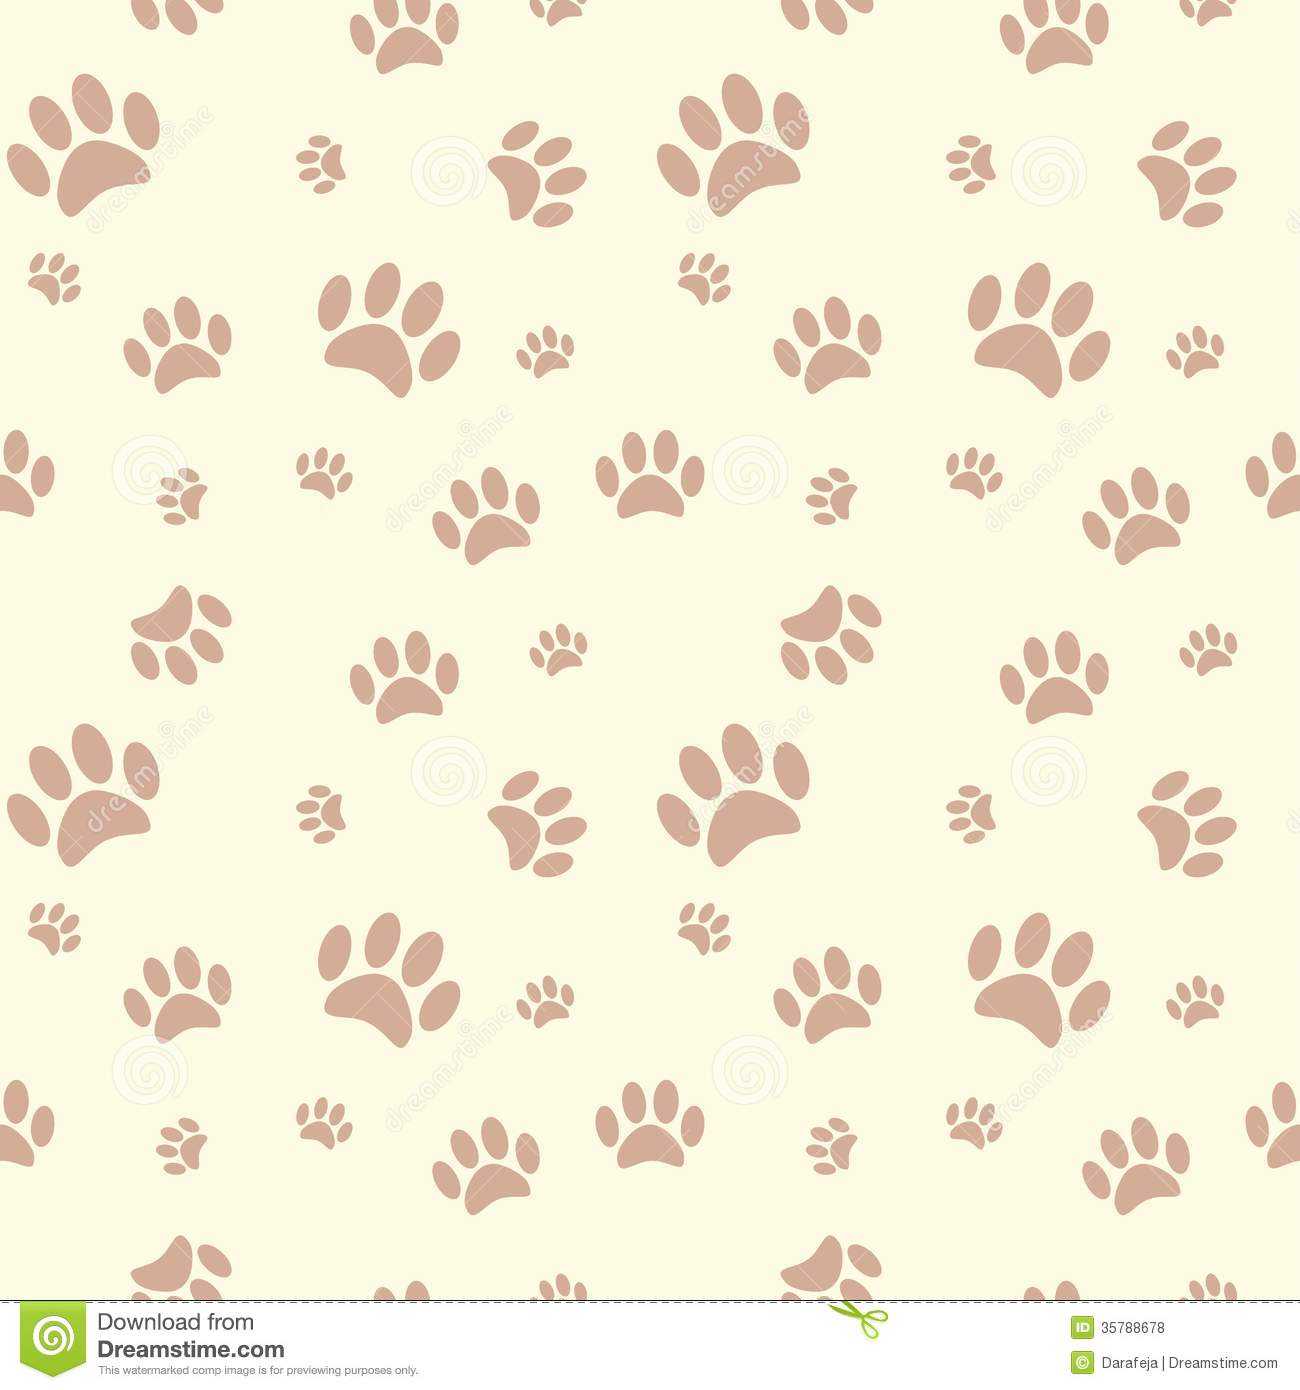 Free Download Cat Paw Print Backgrounds Paw Print Vinyl Decals Set Of